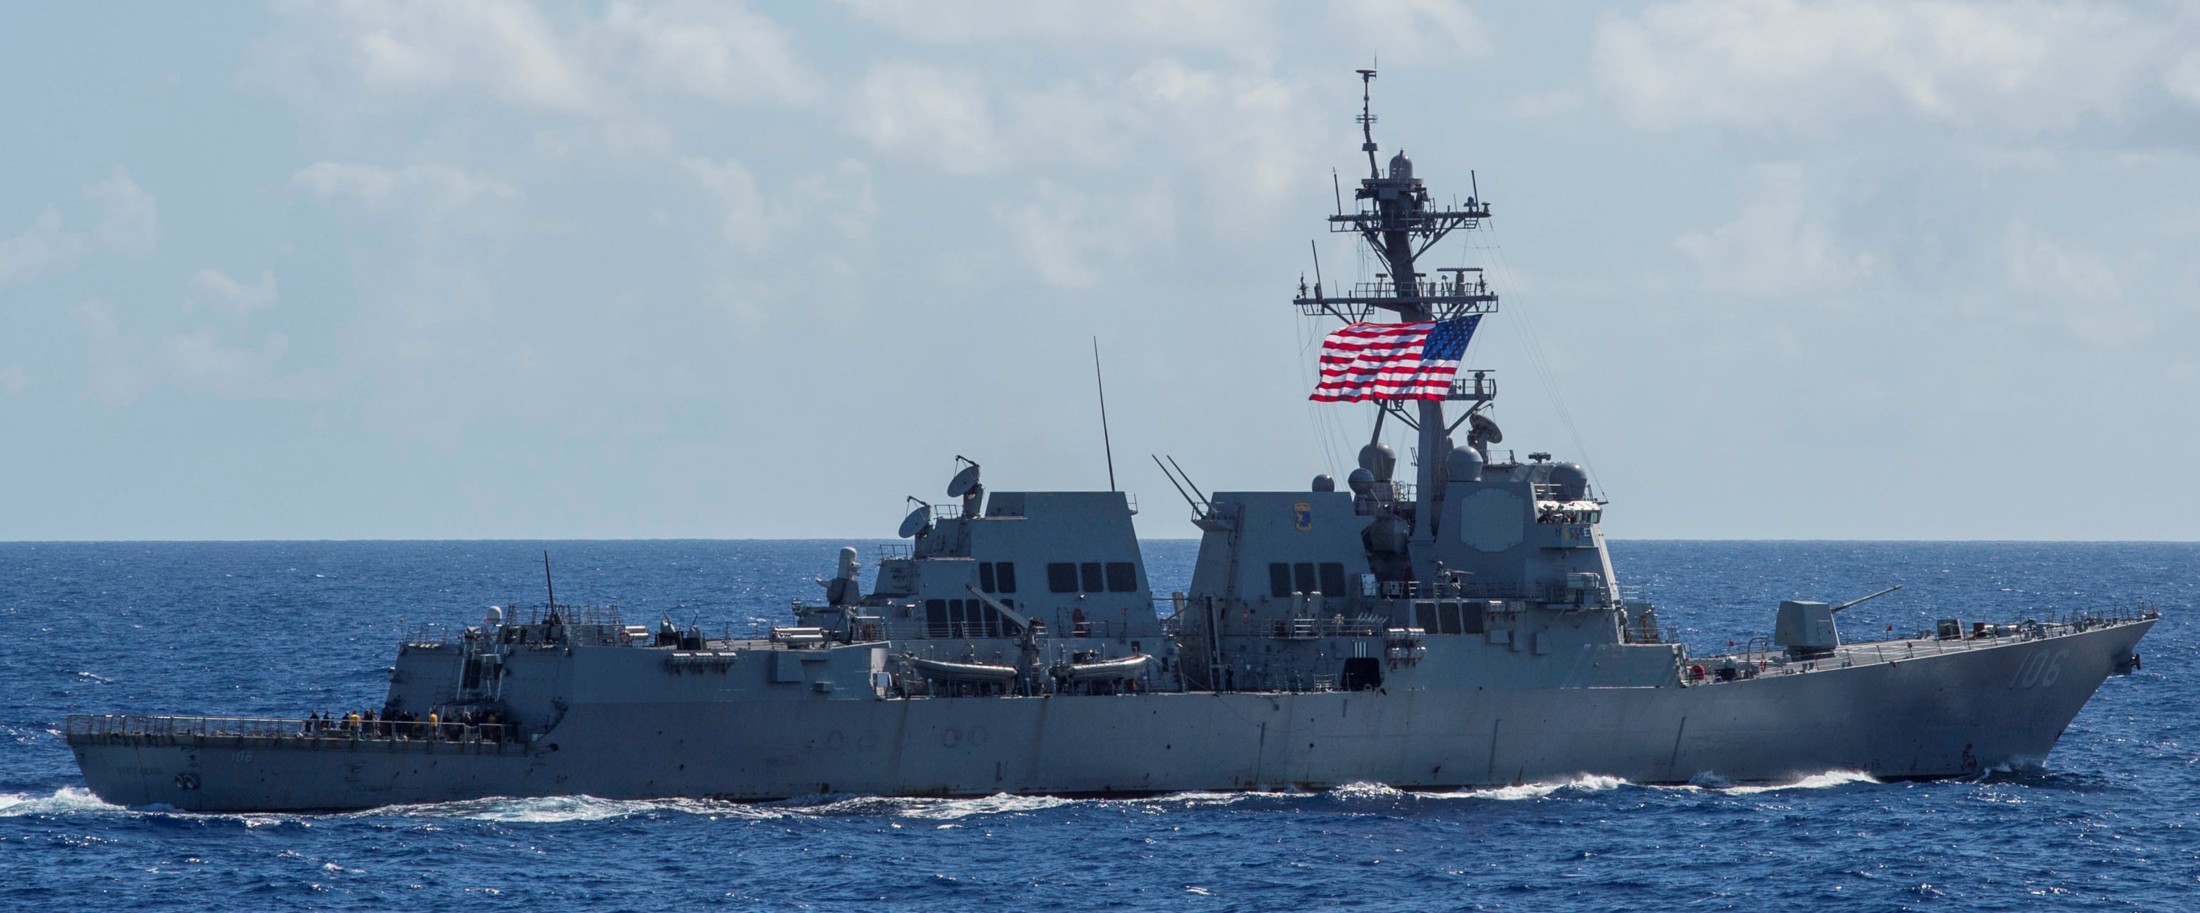 ddg-110 uss william p. lawrence arleigh burke class guided missile destroyer aegis us navy philippine sea 05p